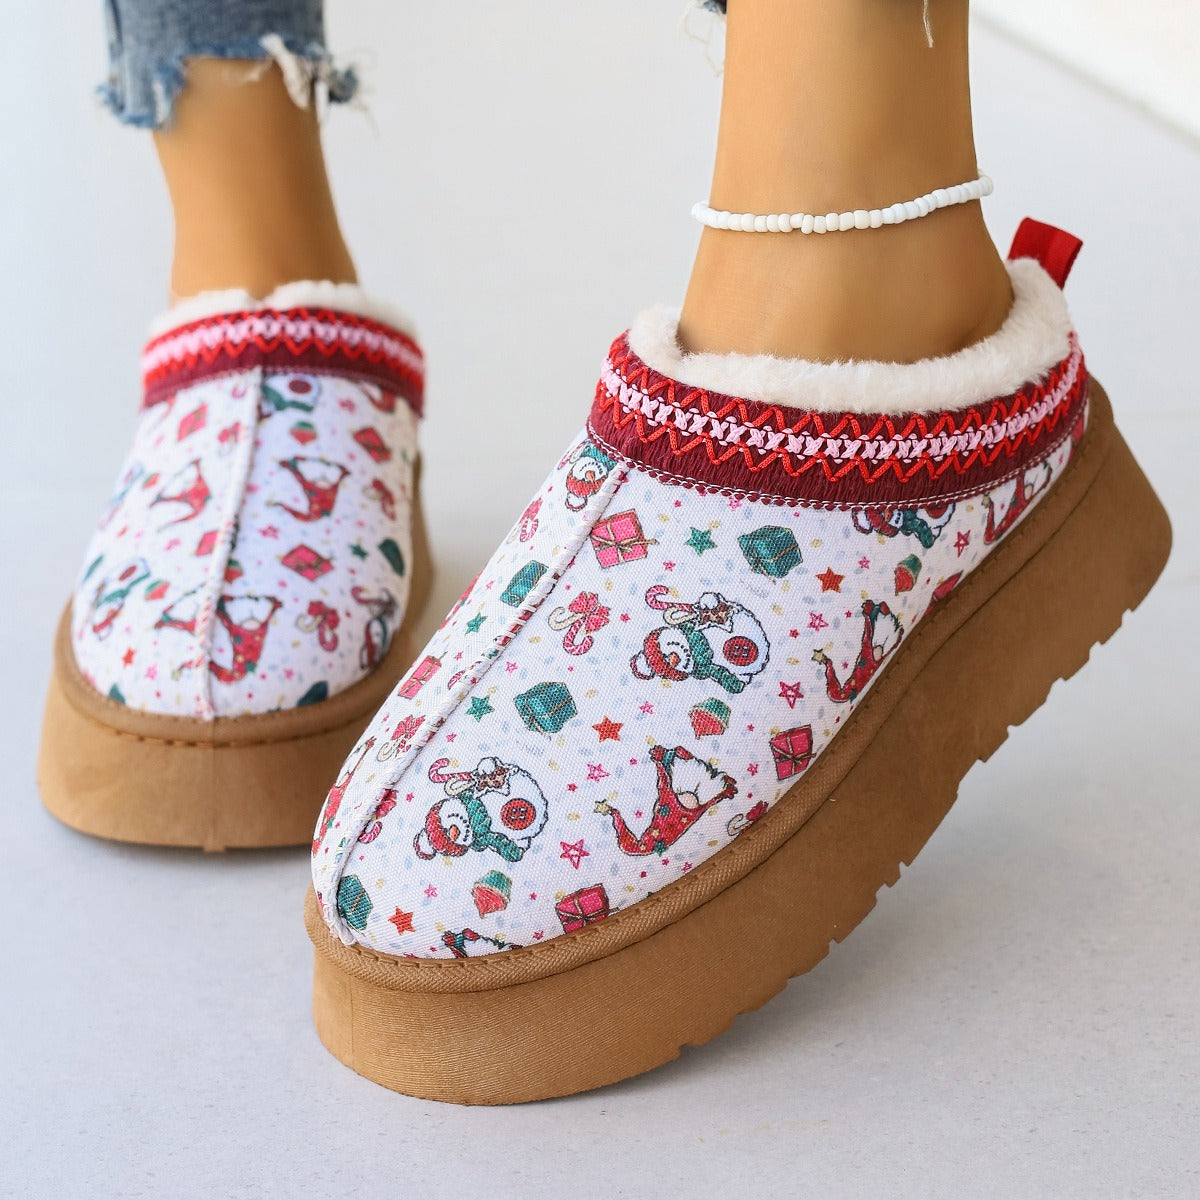 Women's Cartoon Christmas Print Ankle Boots Casual Slip On Plush Lined Home Shoes